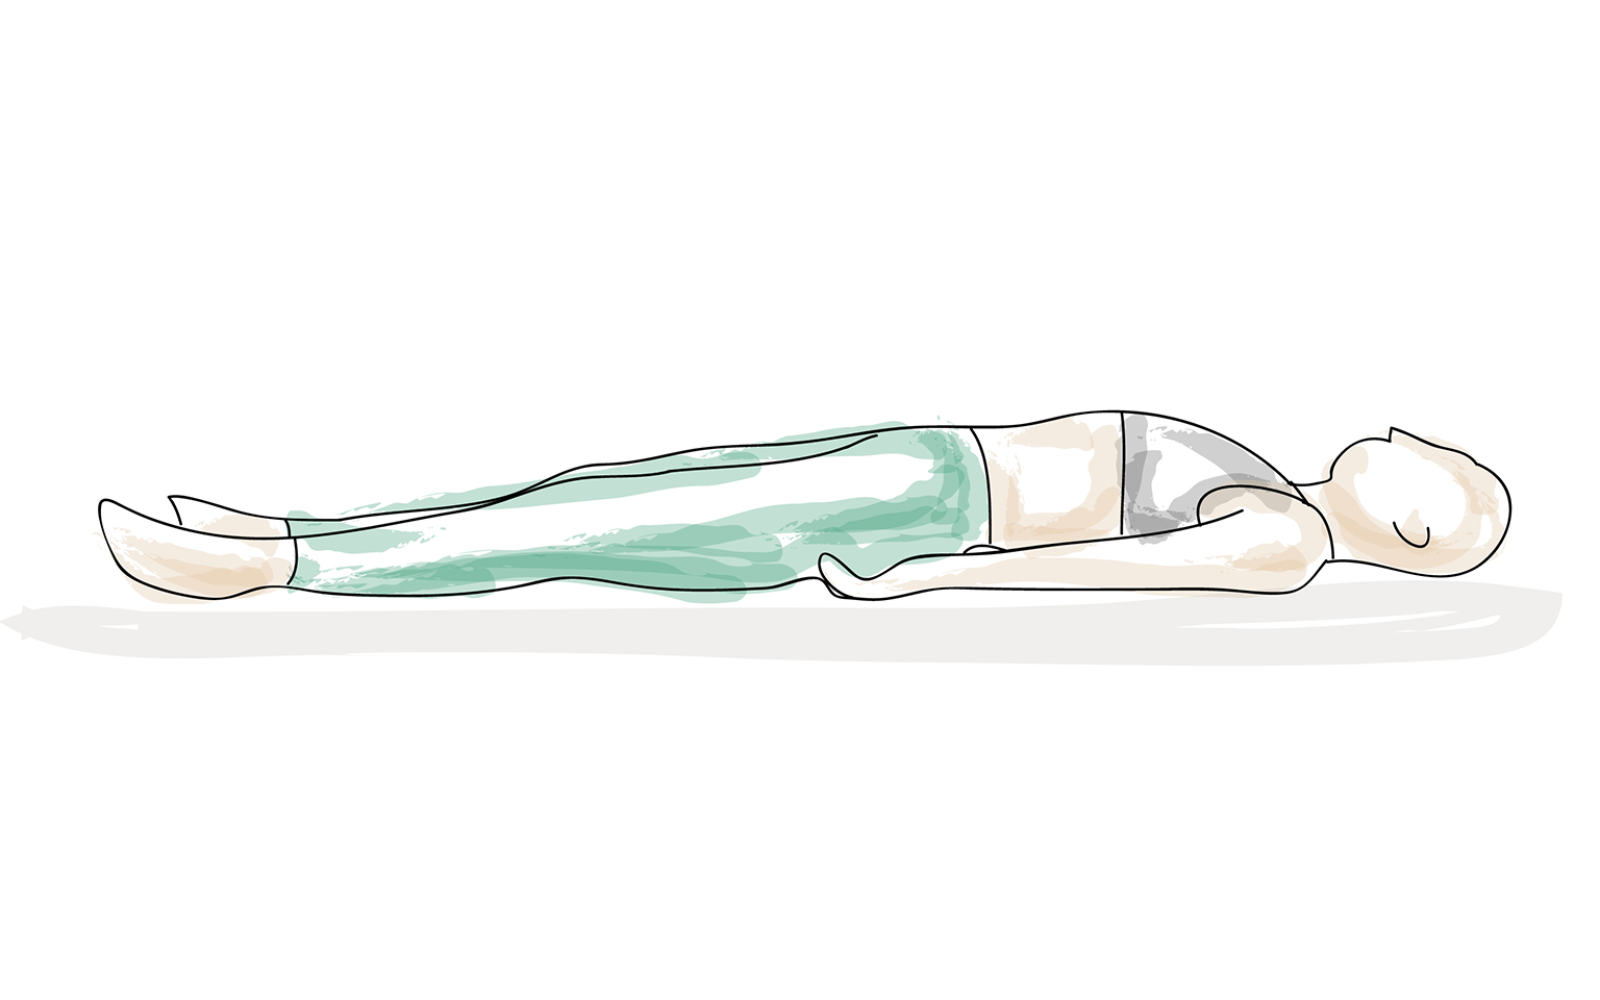 How do you do Savasana, for relaxation and stress release?